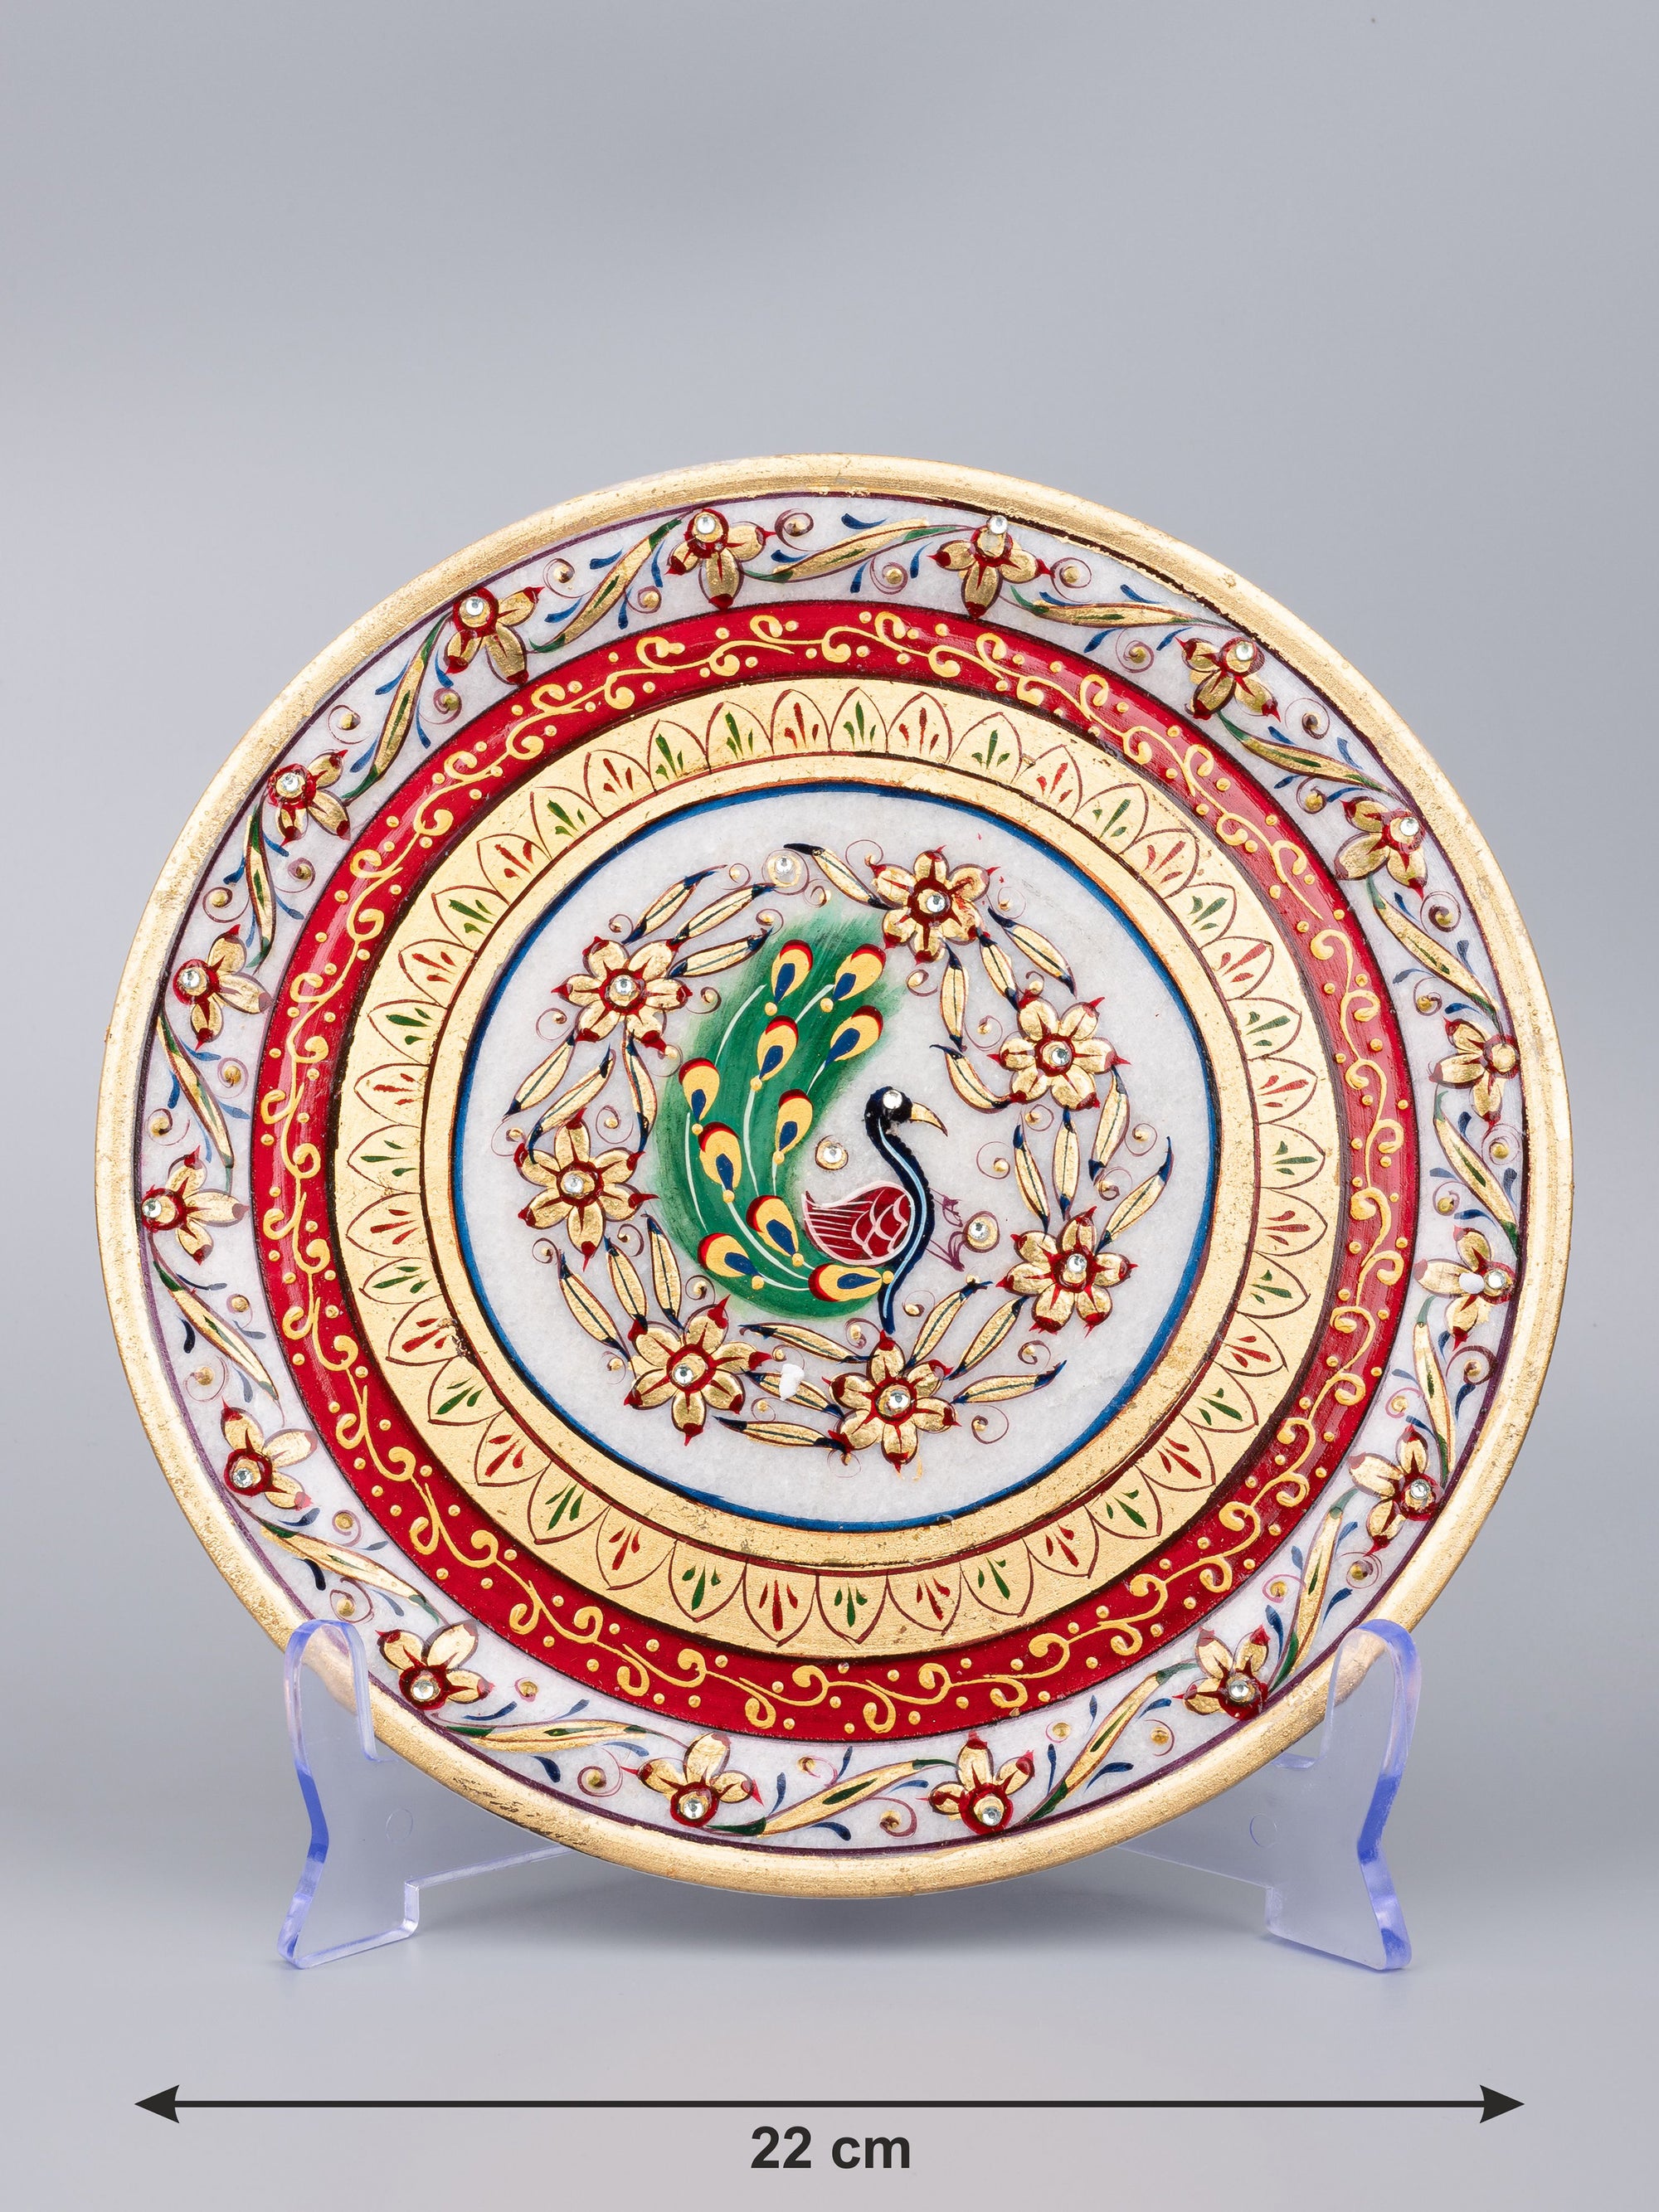 9 inches decorative marble plate with red and yellow meenakari painting - The Heritage Artifacts